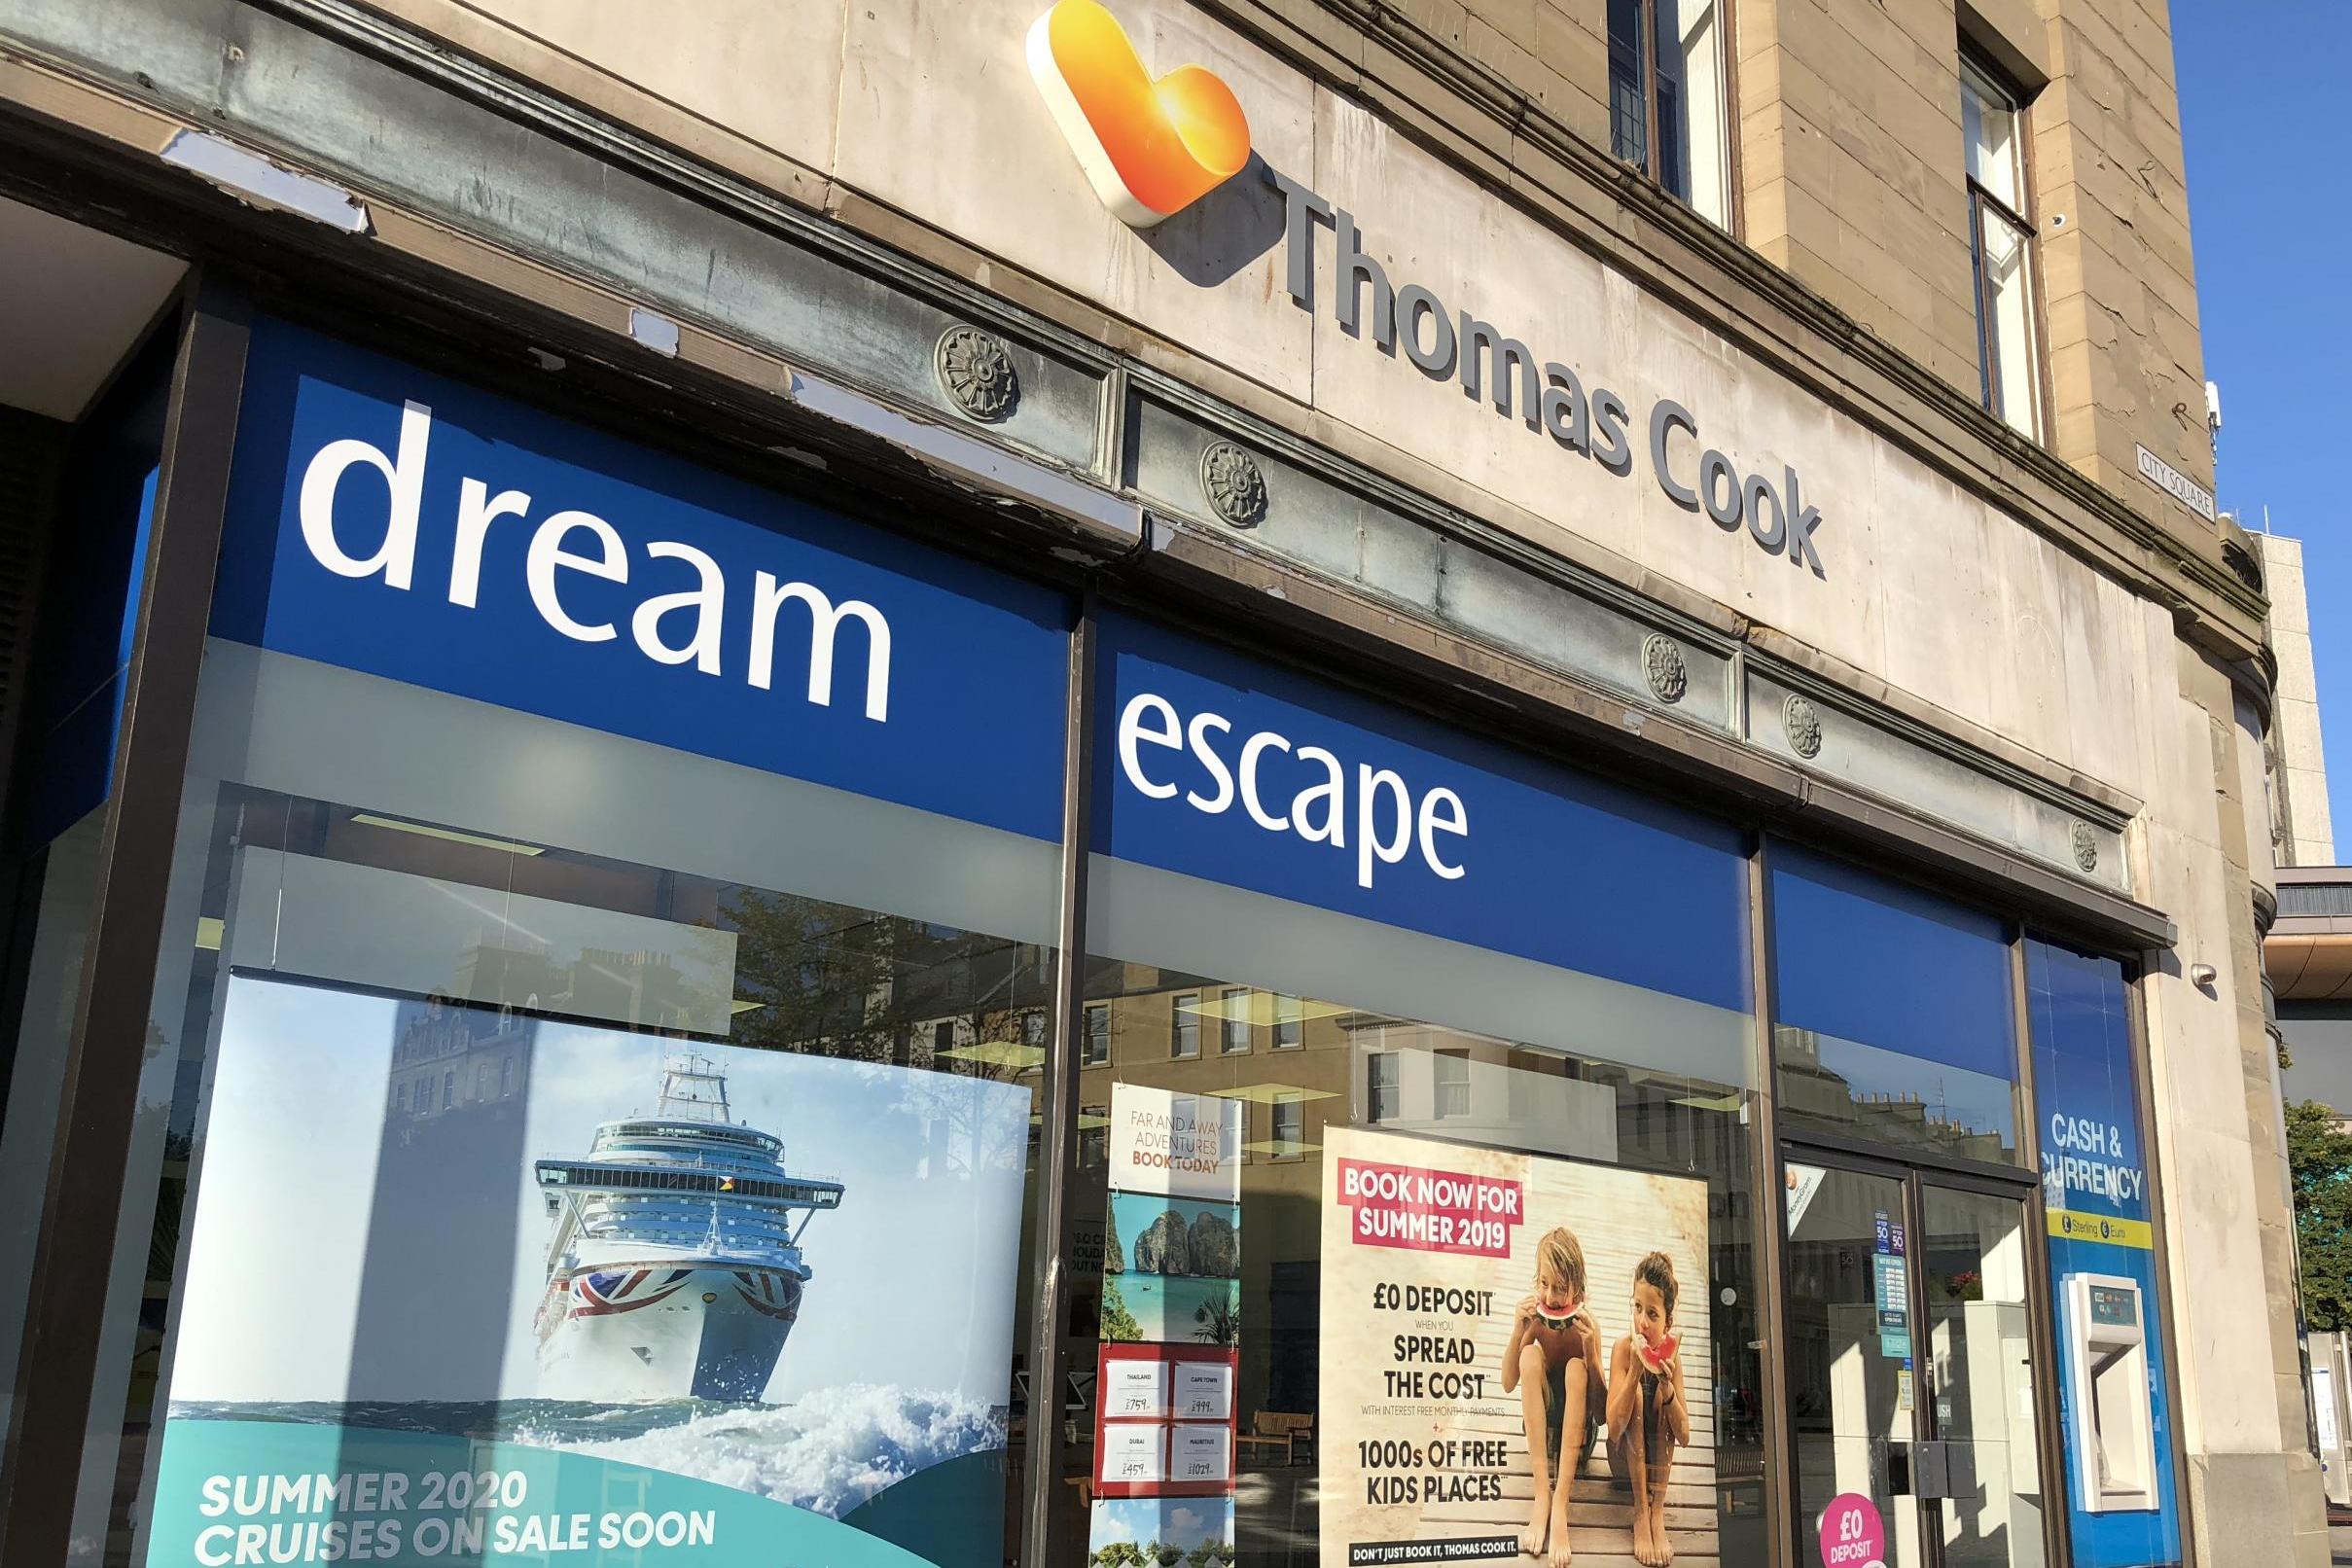 Lost dreams: a Thomas Cook travel agency in Dundee